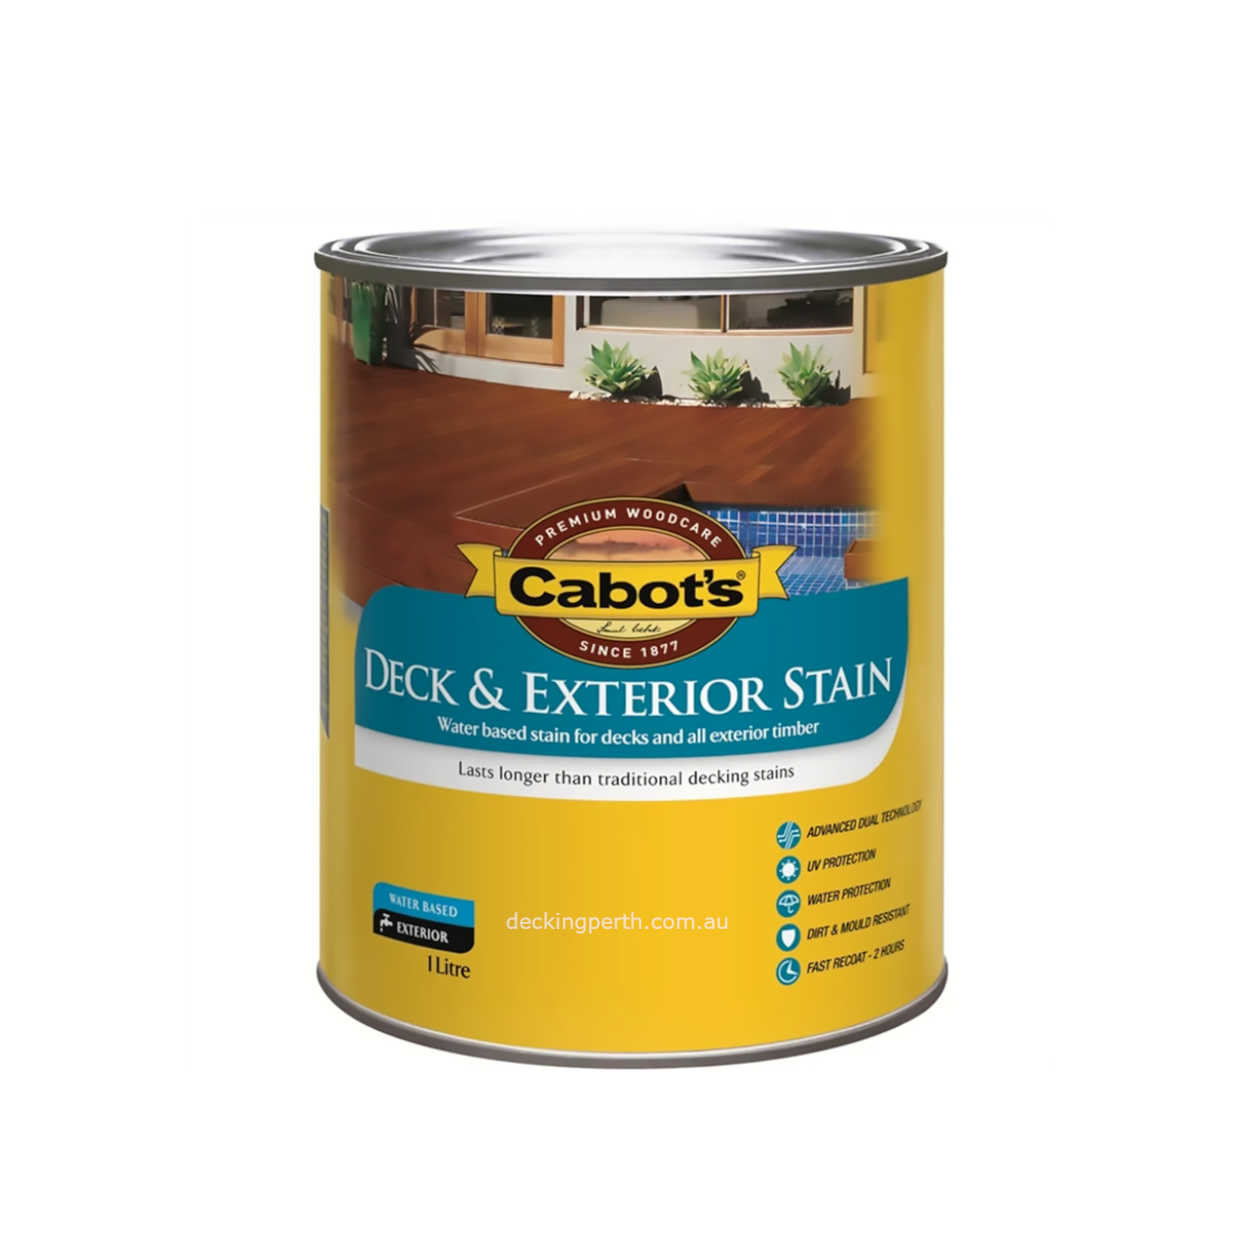 Cabots_Deck___Exterior_Stain_Water_Based_1_litre_Decking_Perth